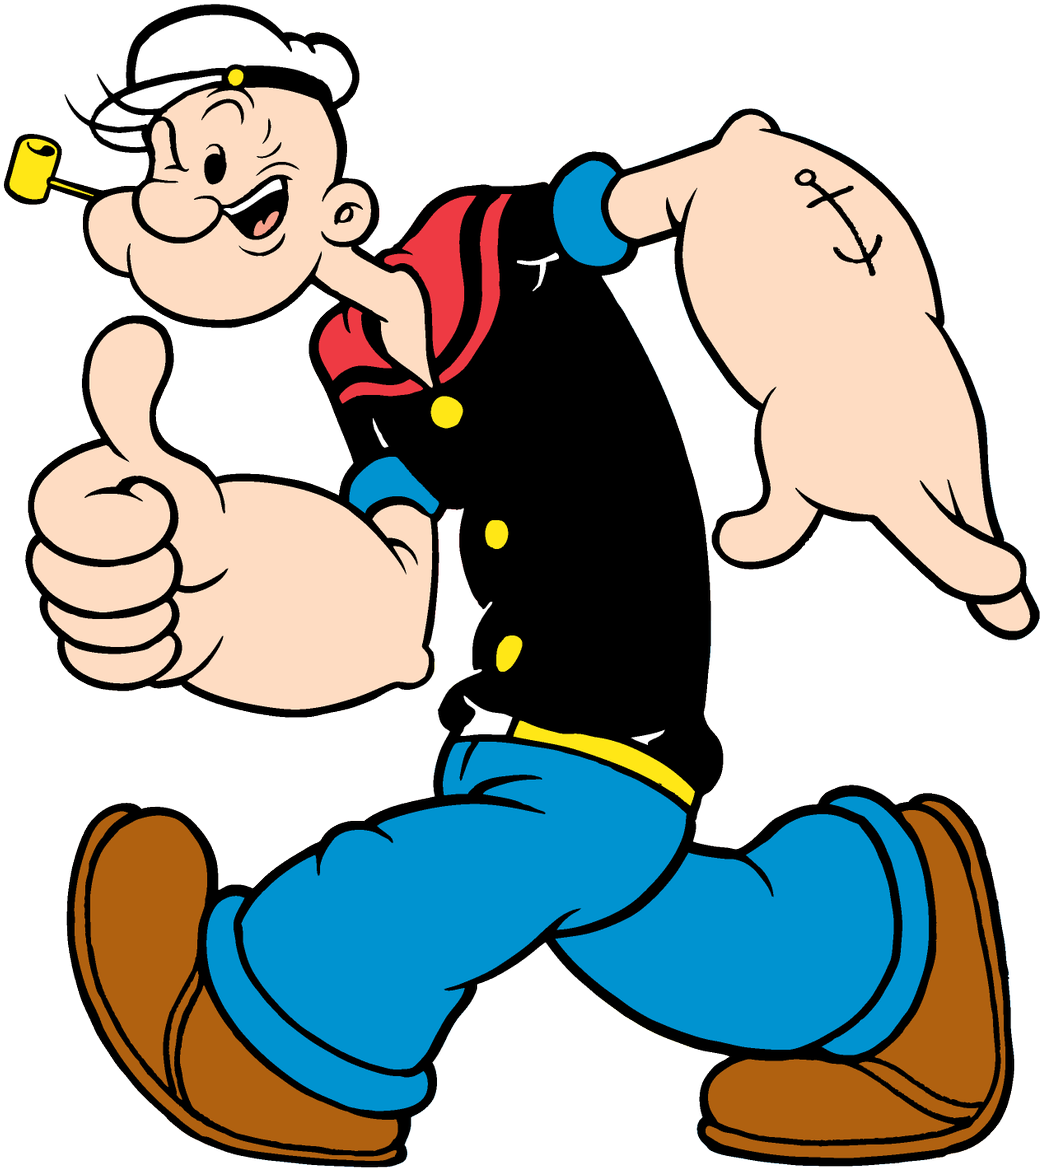 Popeye Thumbs Up Character Illustration PNG